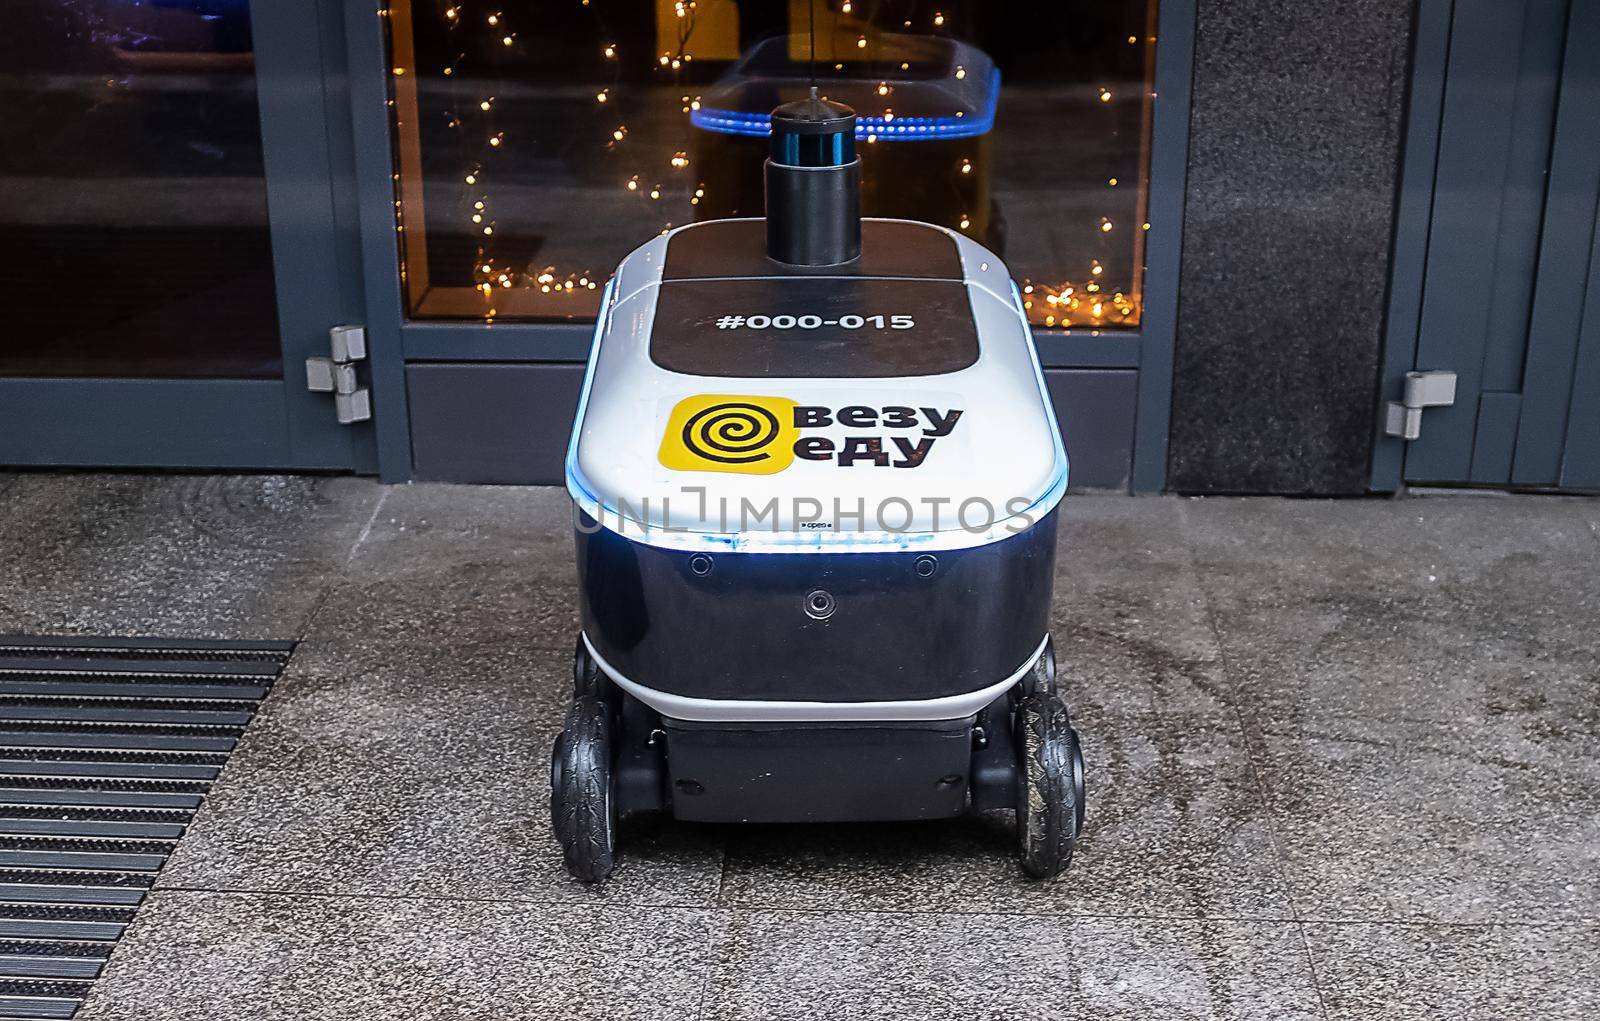 Delivery robot by fifg